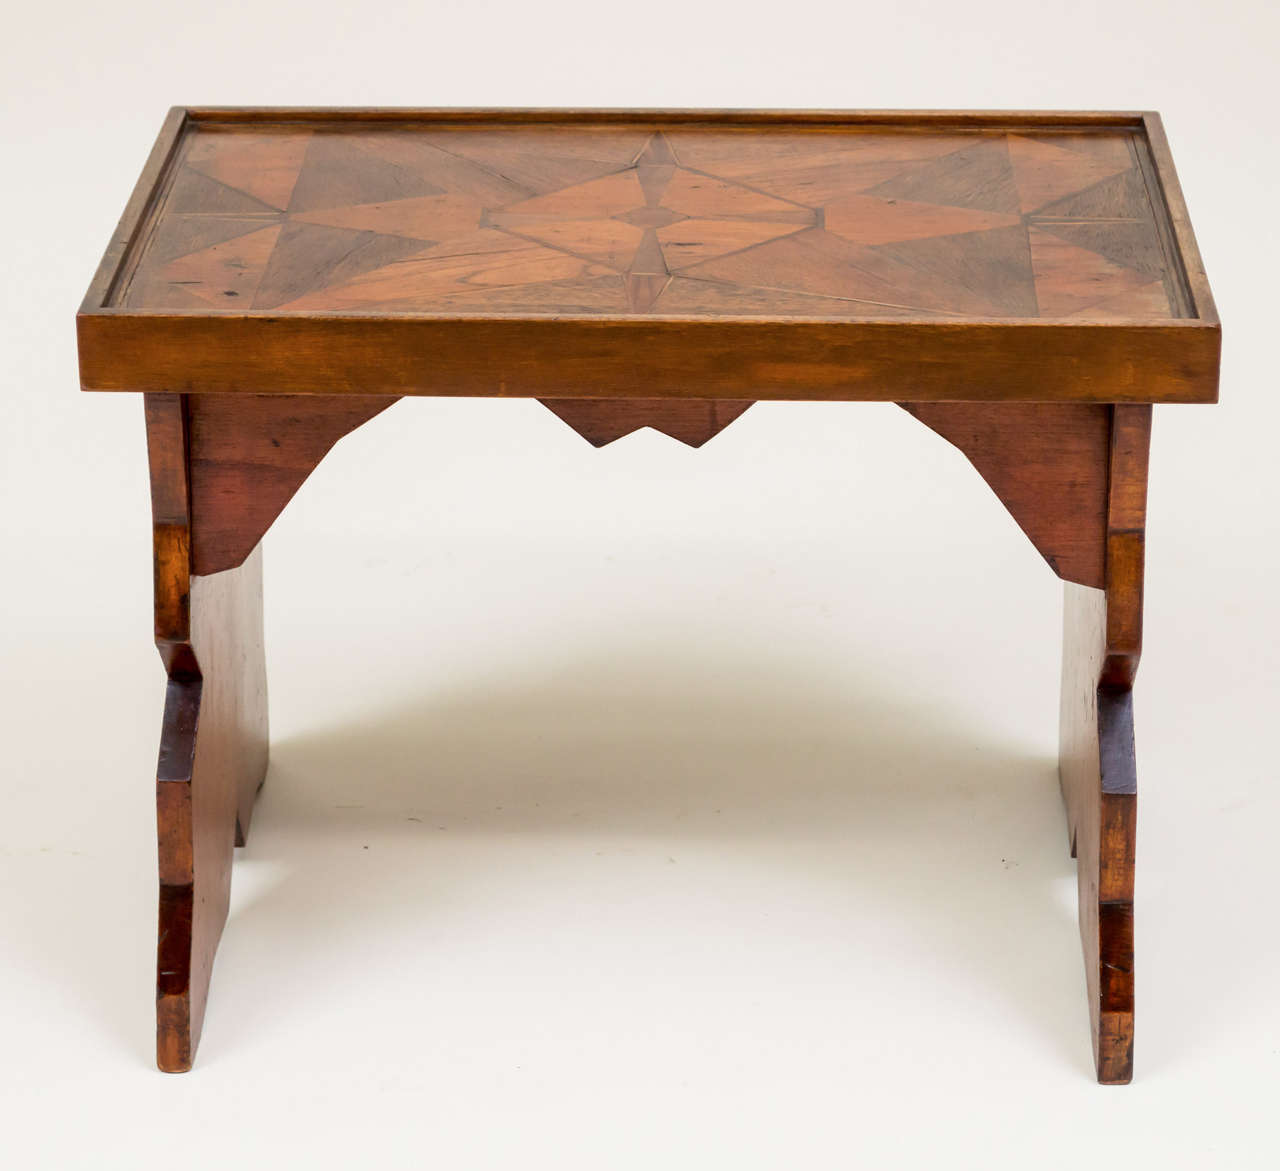 American folk art low coffee table of good scale. Stylized Deco form with geometric marquetry top. Old varnish finish brought up with wax.